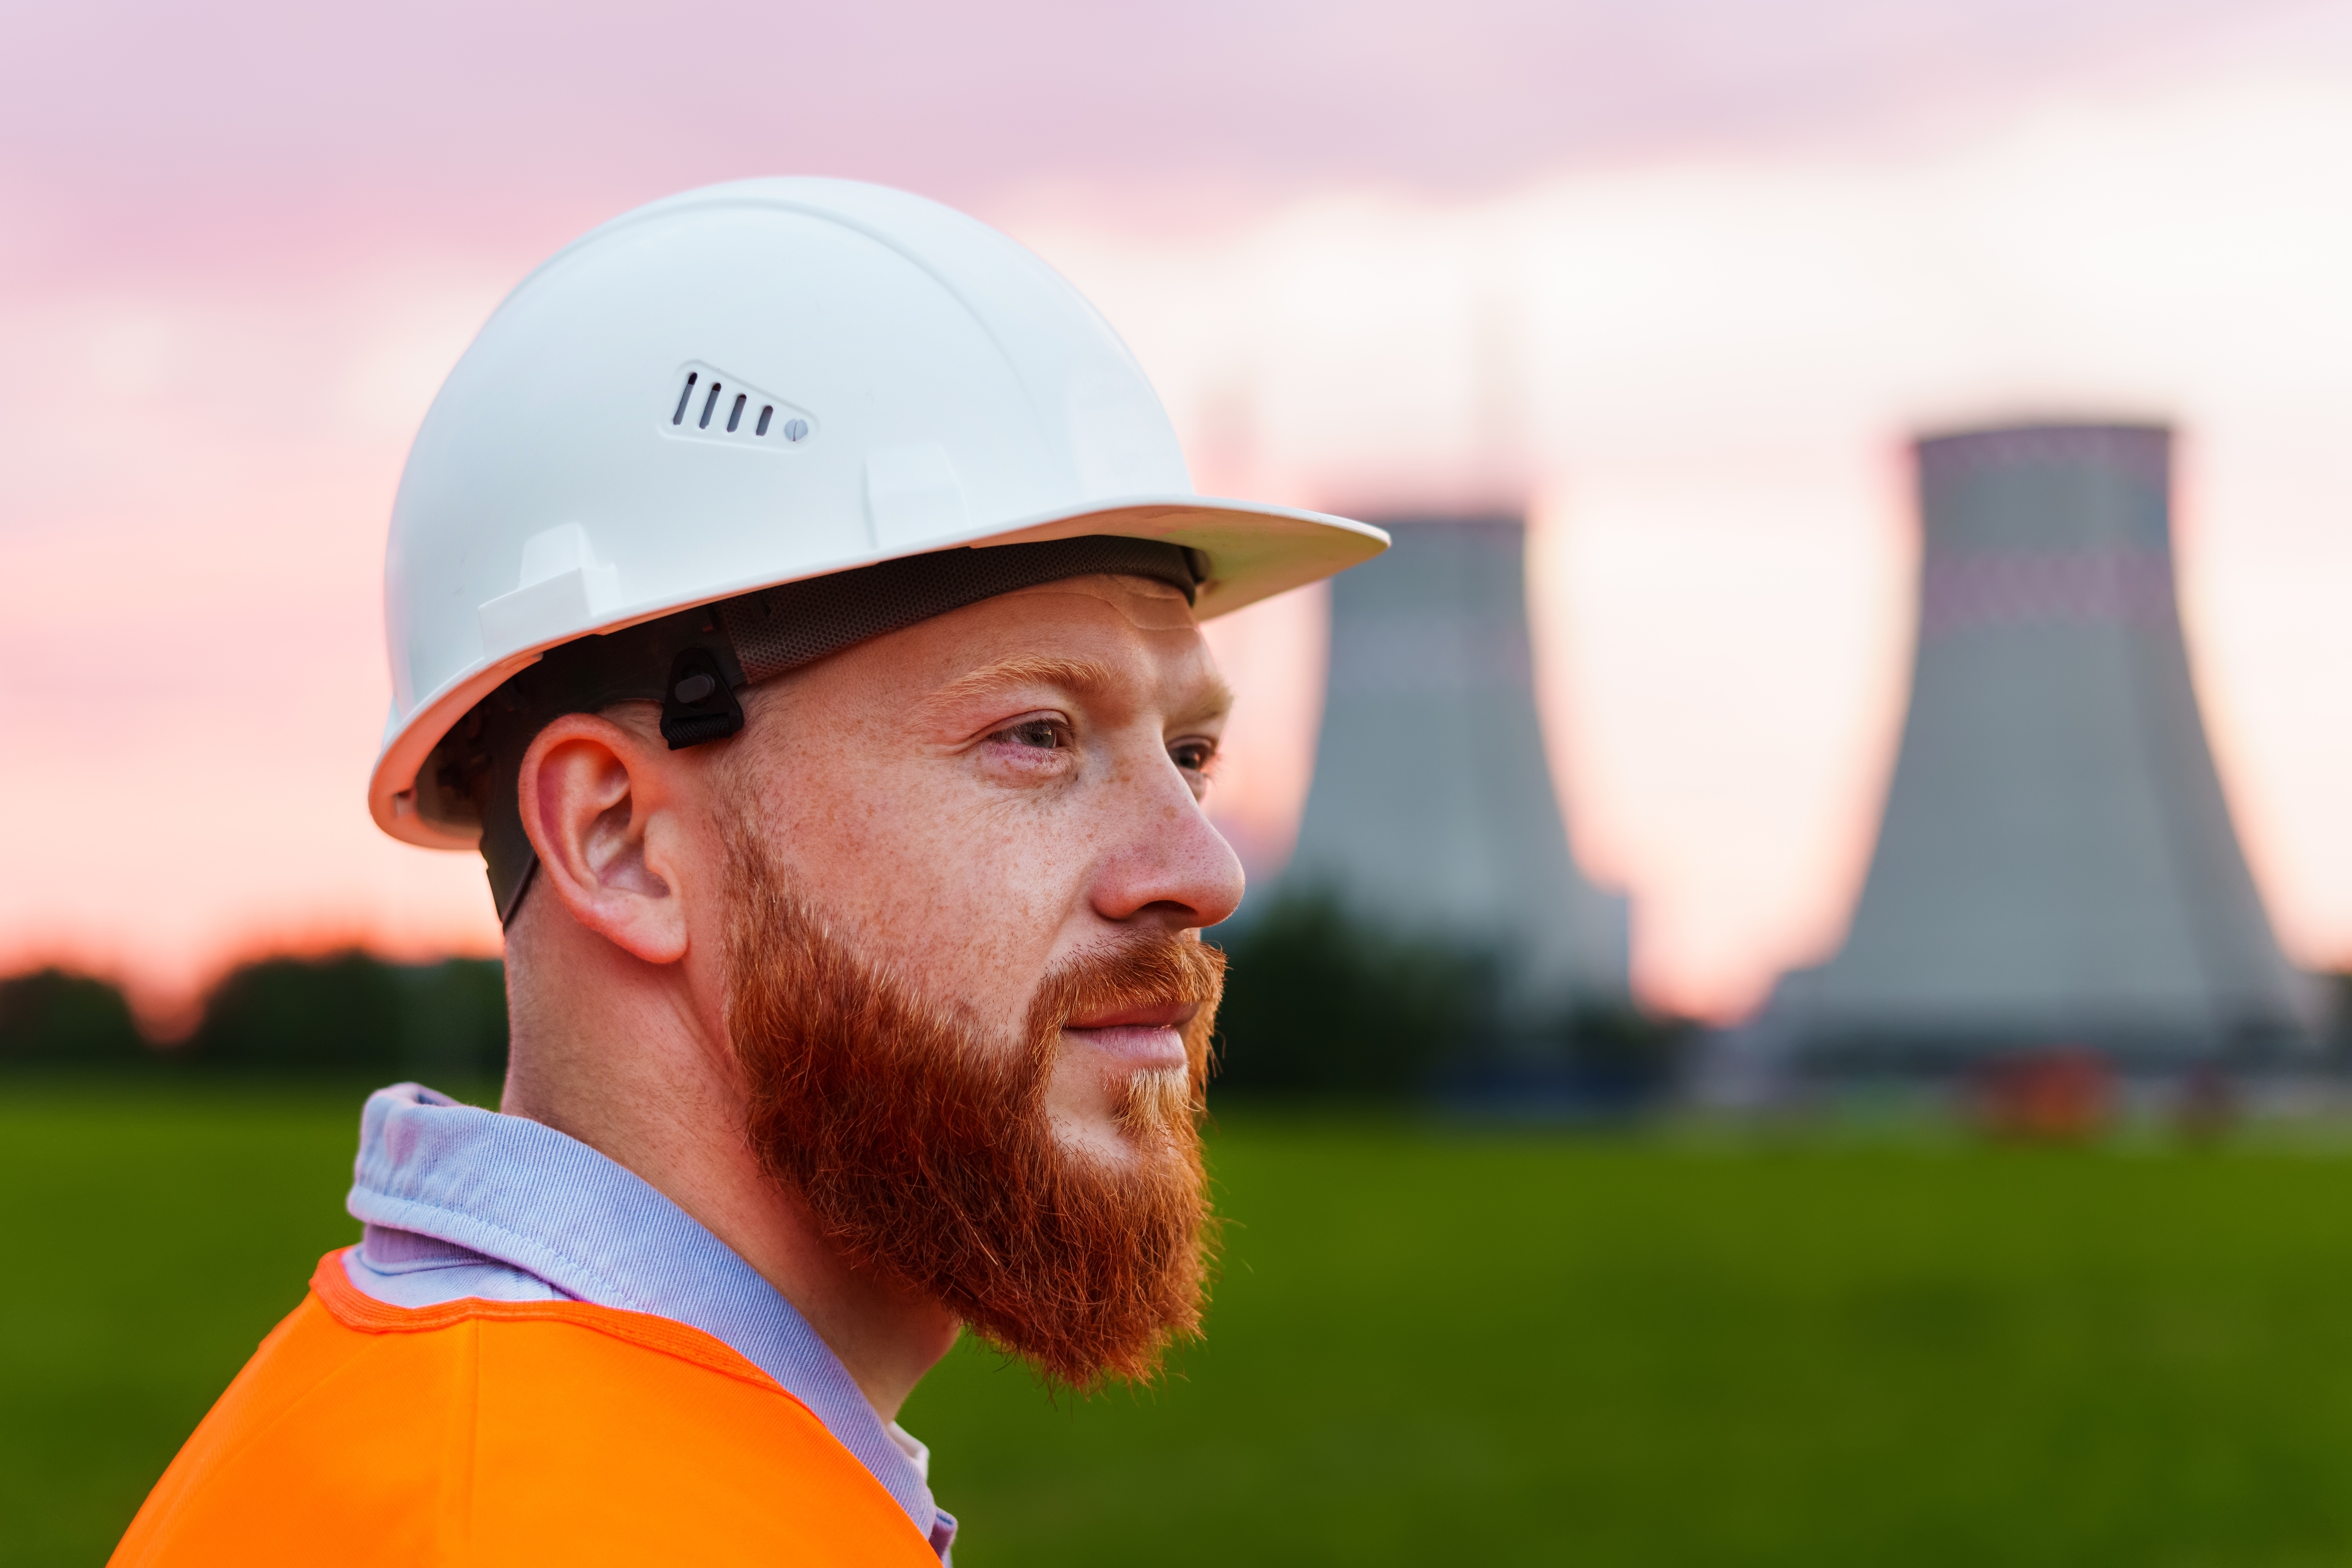 nuclear facility in background with white male in foreground wearing white hard hat, orange shirt, and having red beard.